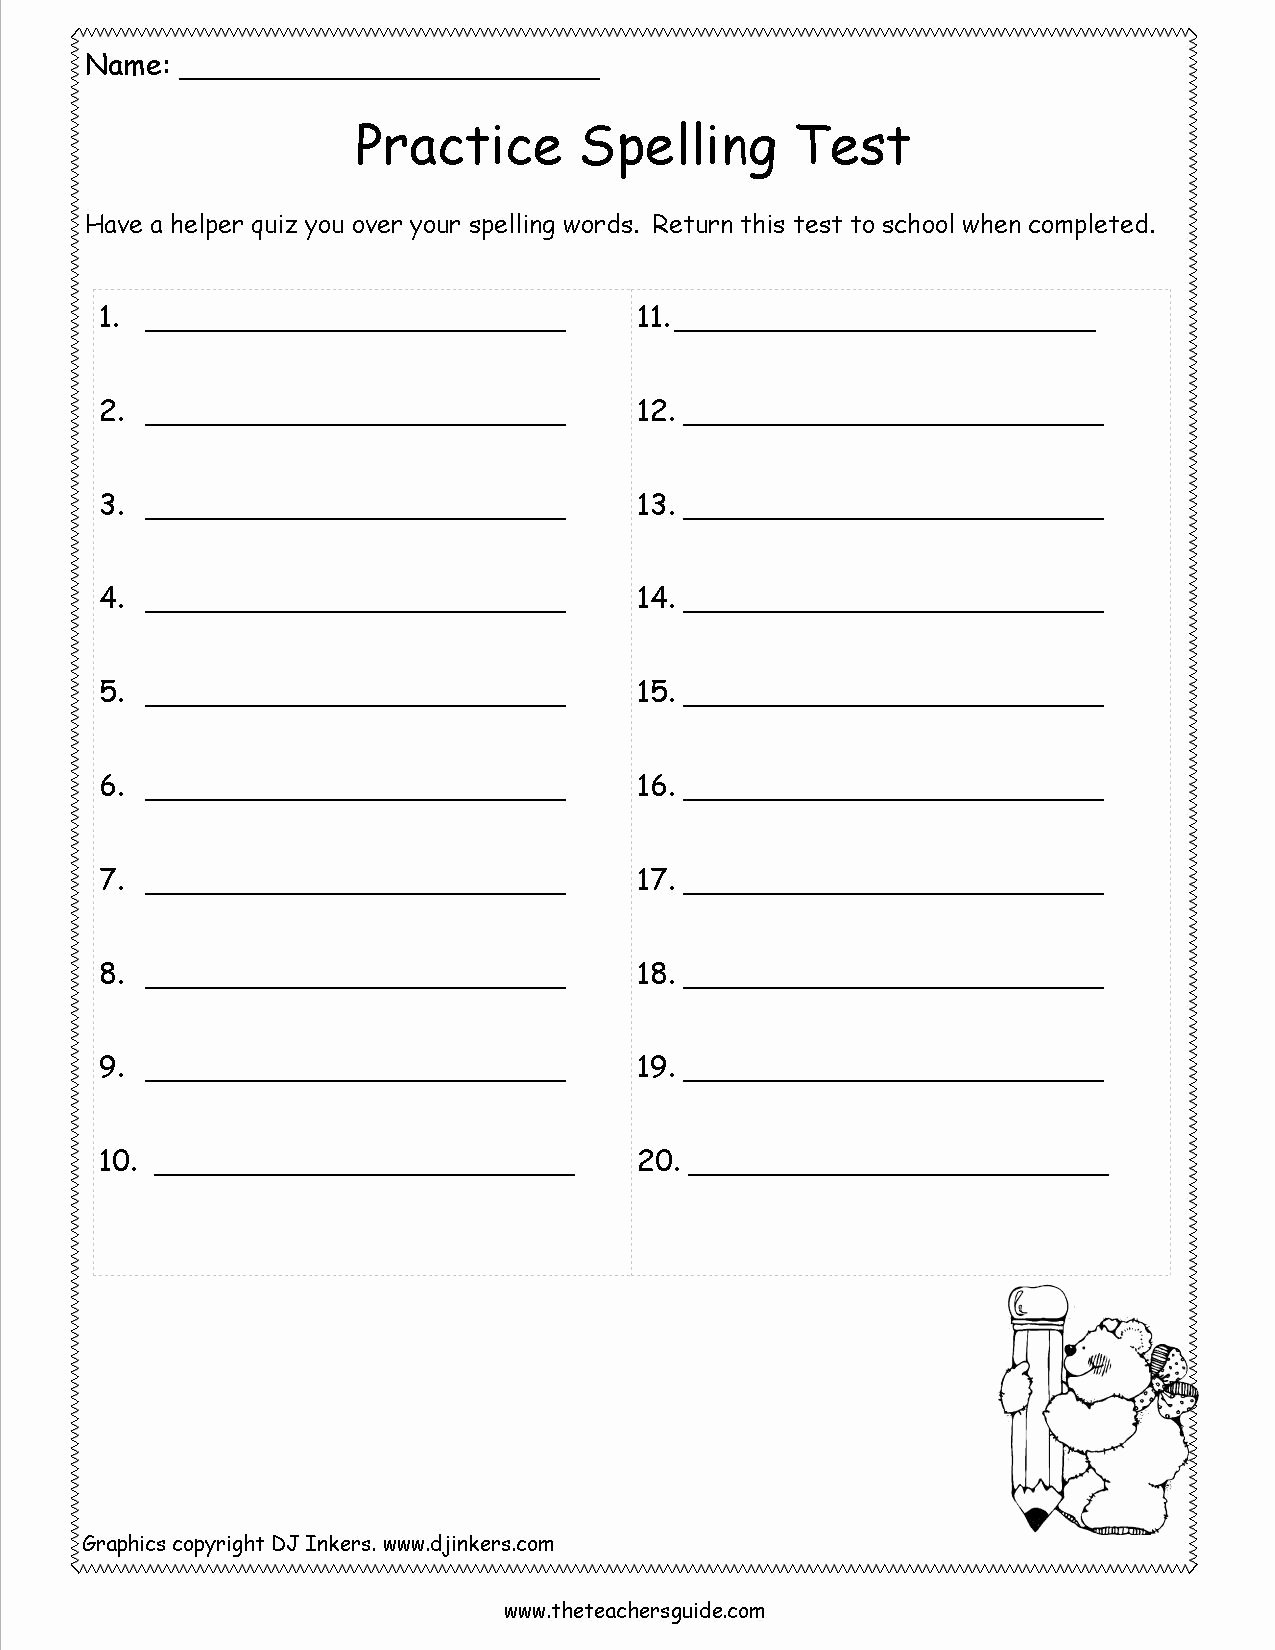 Spelling Test Template 15 Words Luxury Spelling Test Template 28 Images Search Results for